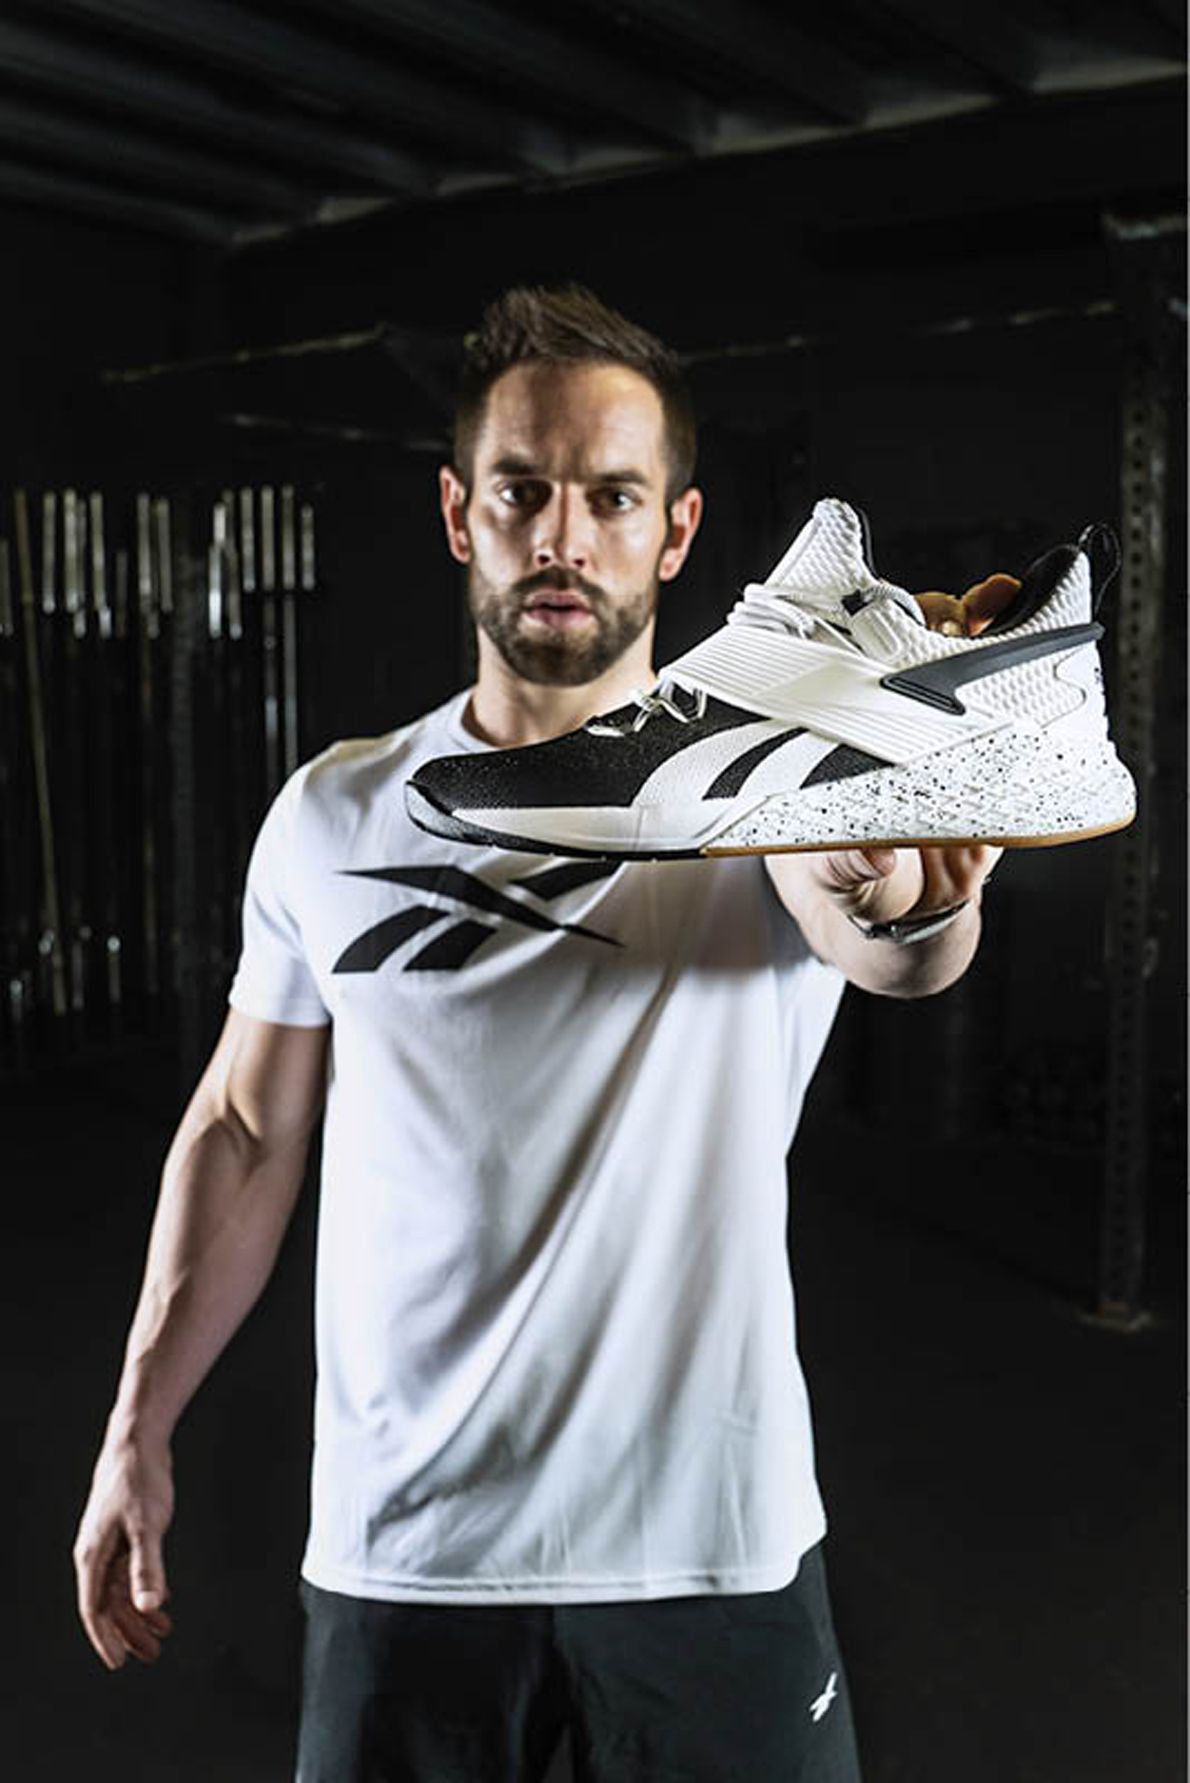 Reebok to Release Signature Rich Froning Nano X CrossFit Shoe